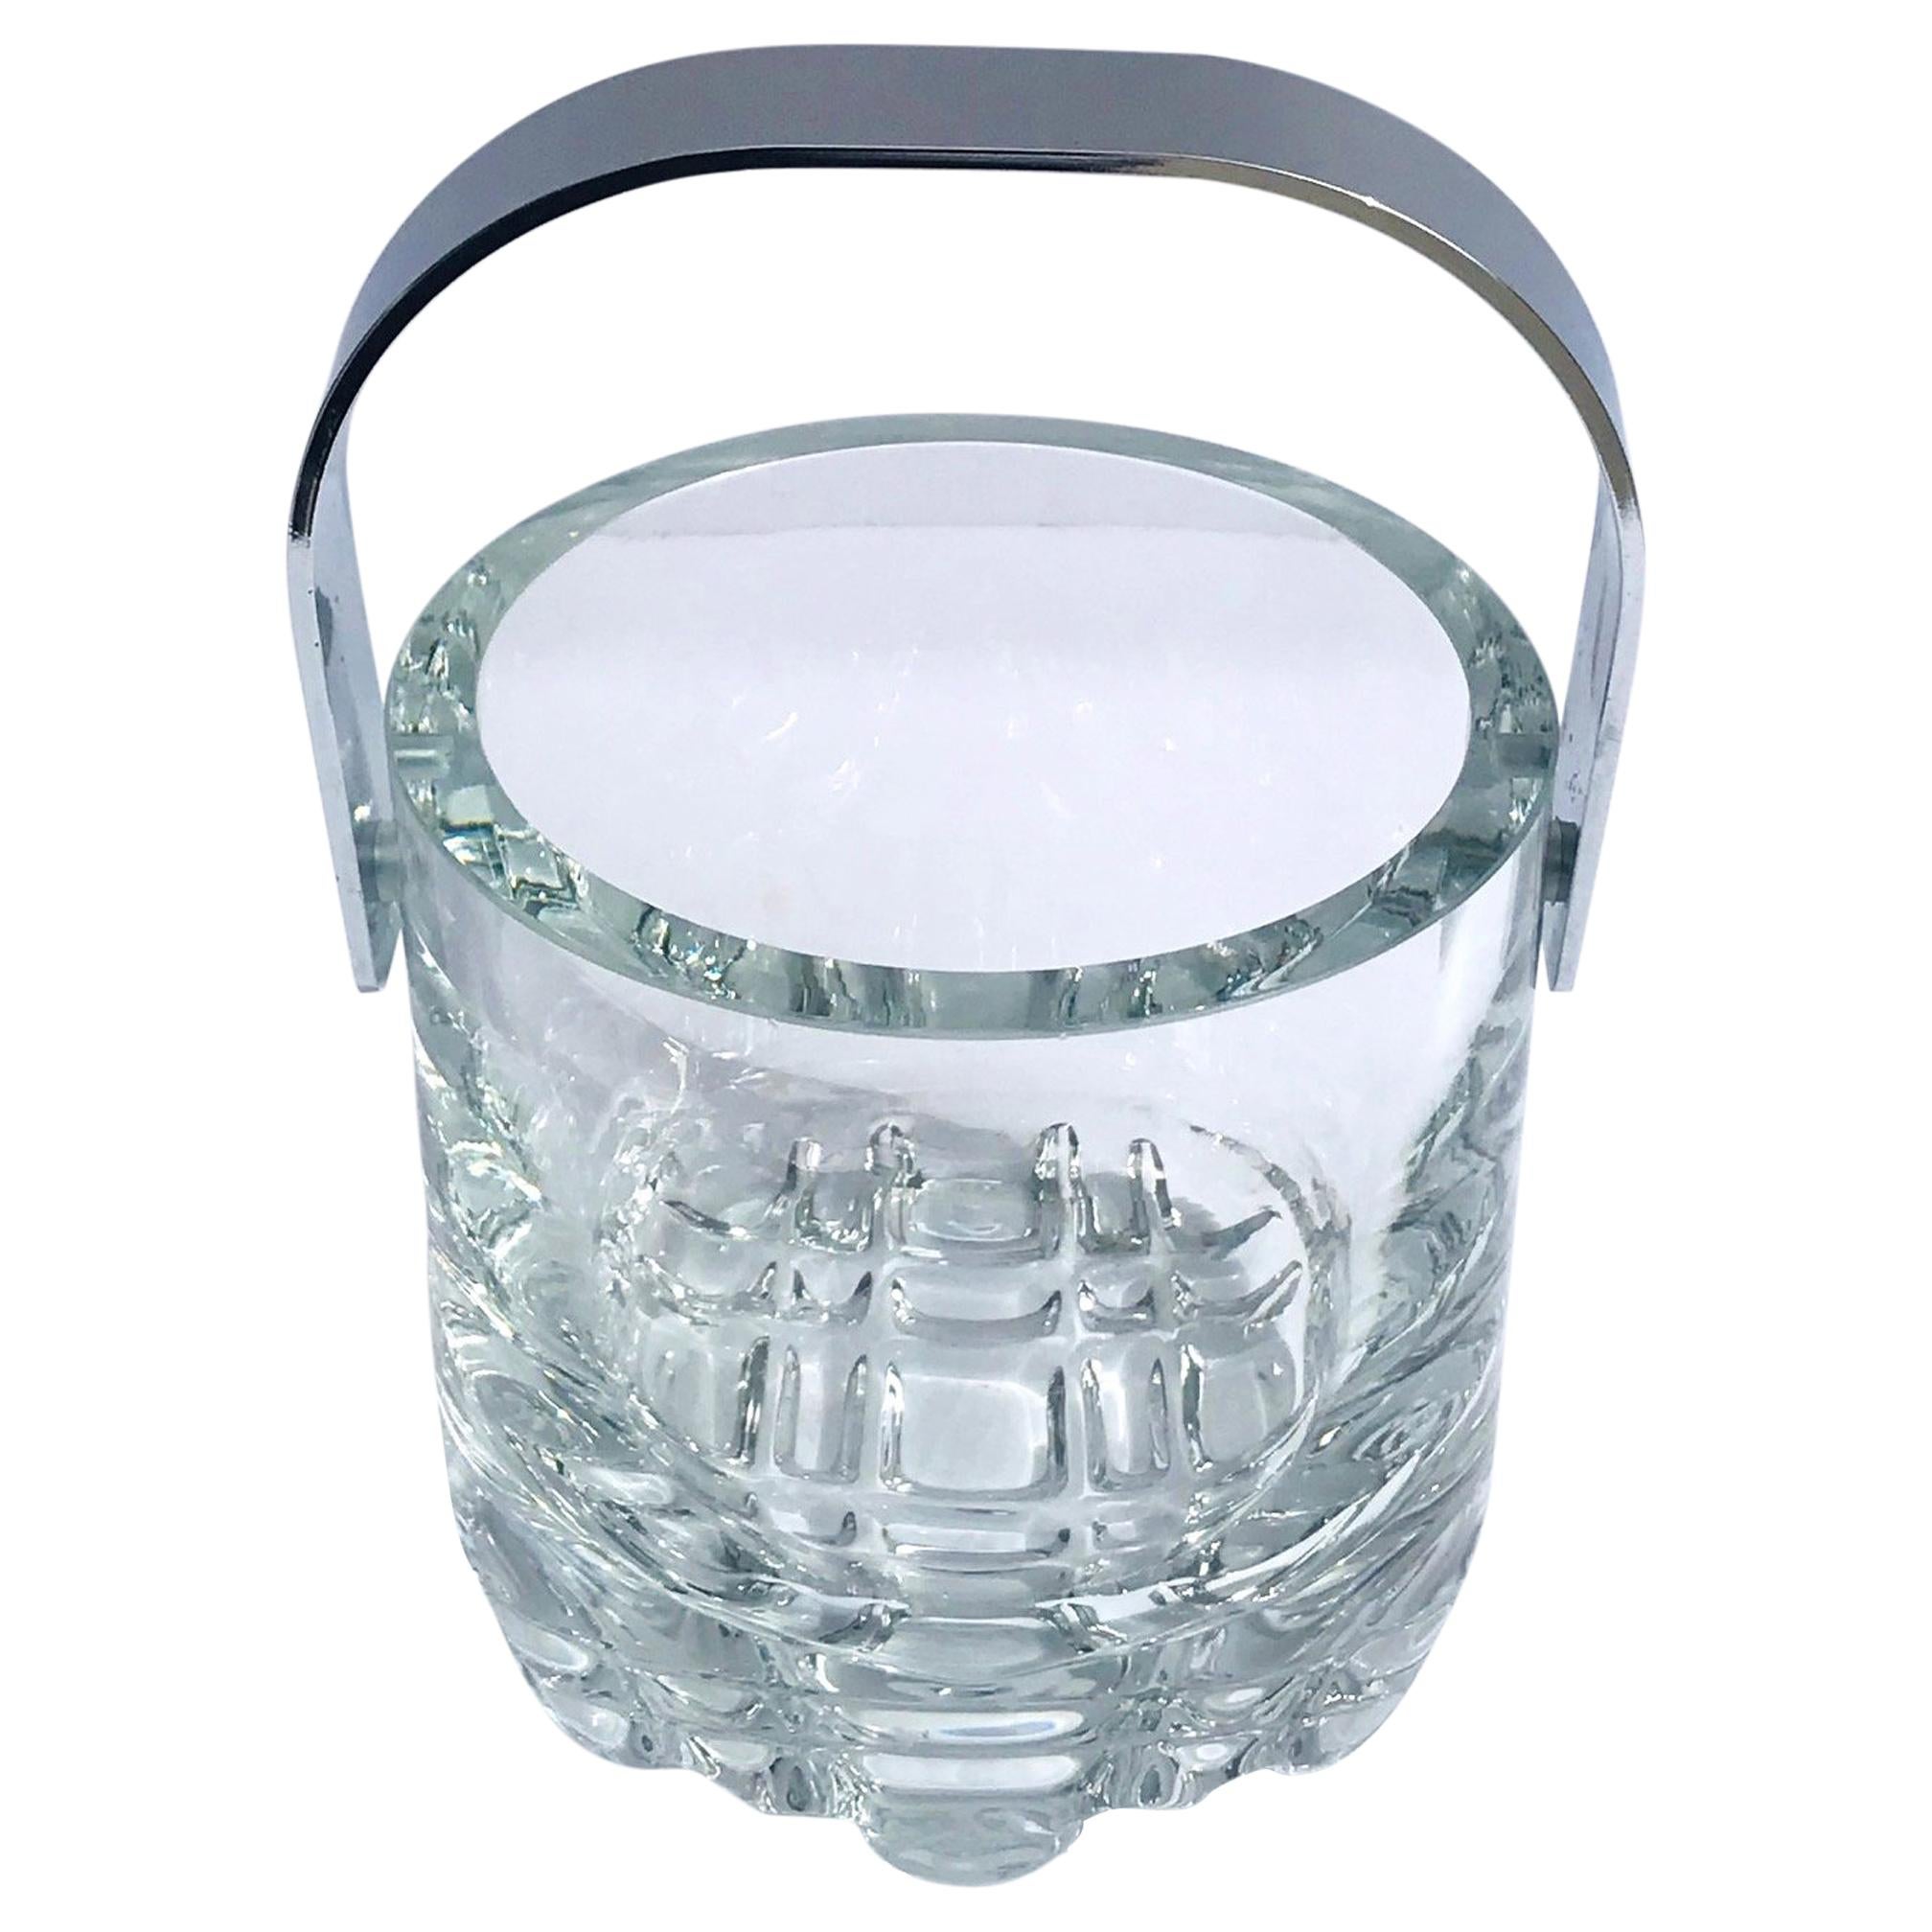 1970s Vintage Crystal Ice Bucket with Ice Glass Design